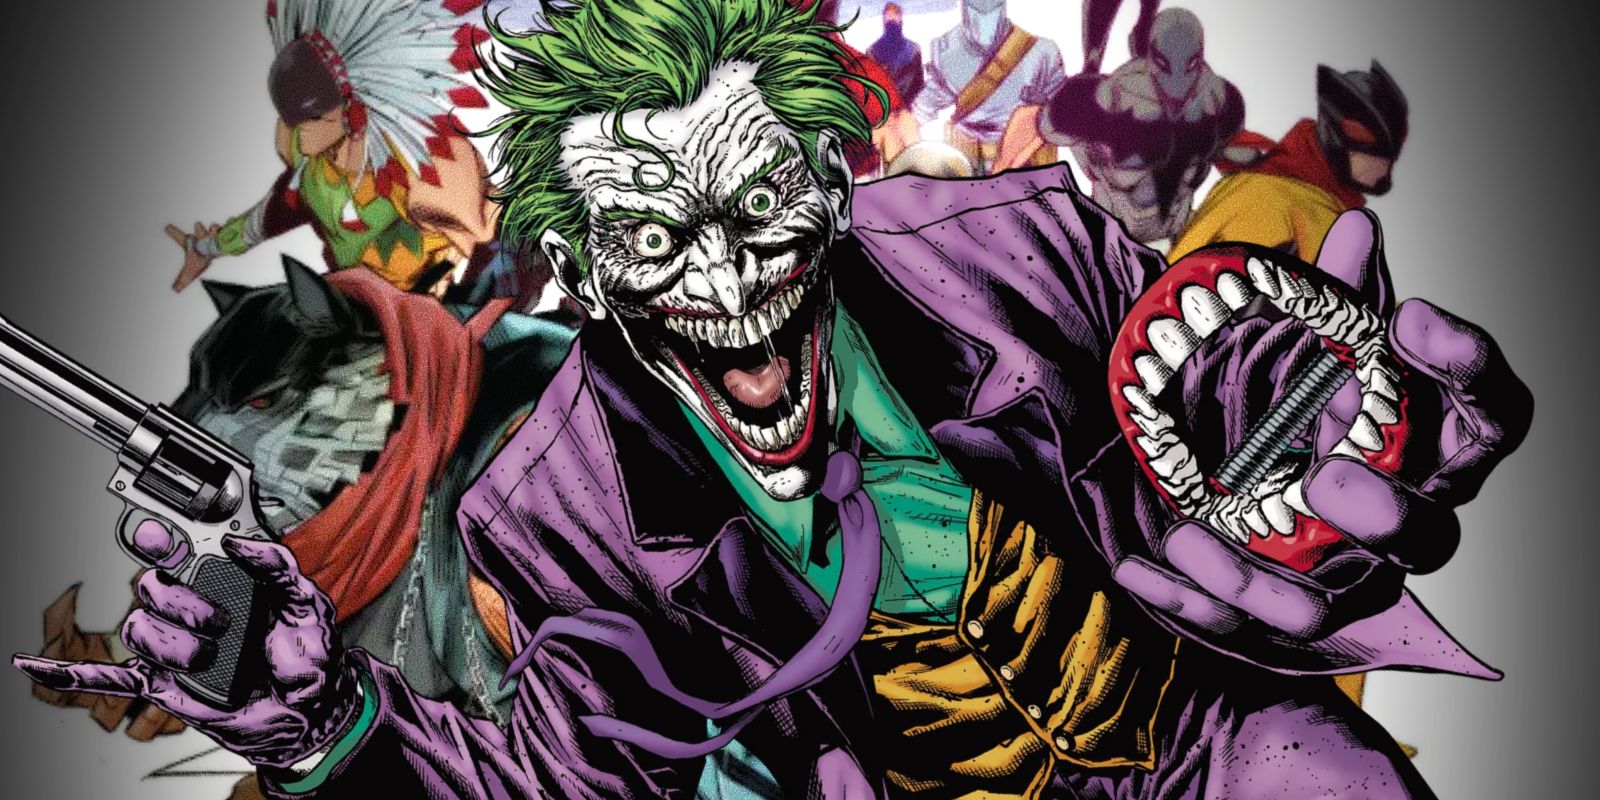 Joker superimposed over an image of Batman Incorporated